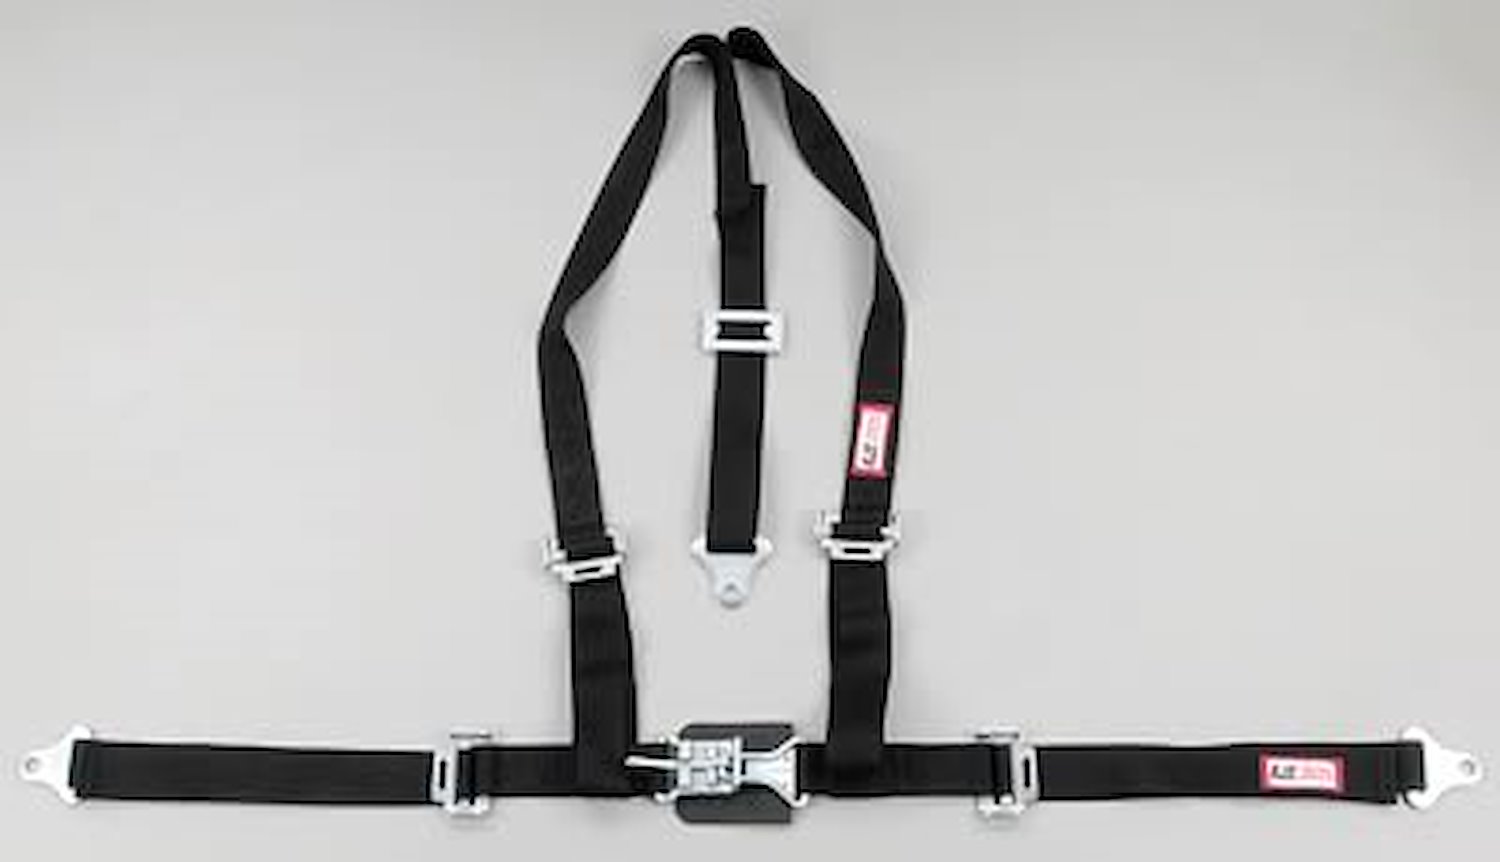 NON-SFI L&L HARNESS 2 PULL DOWN Lap Belt SEWN IN 2 S.H. V ROLL BAR Mount ALL WRAP ENDS BLUE